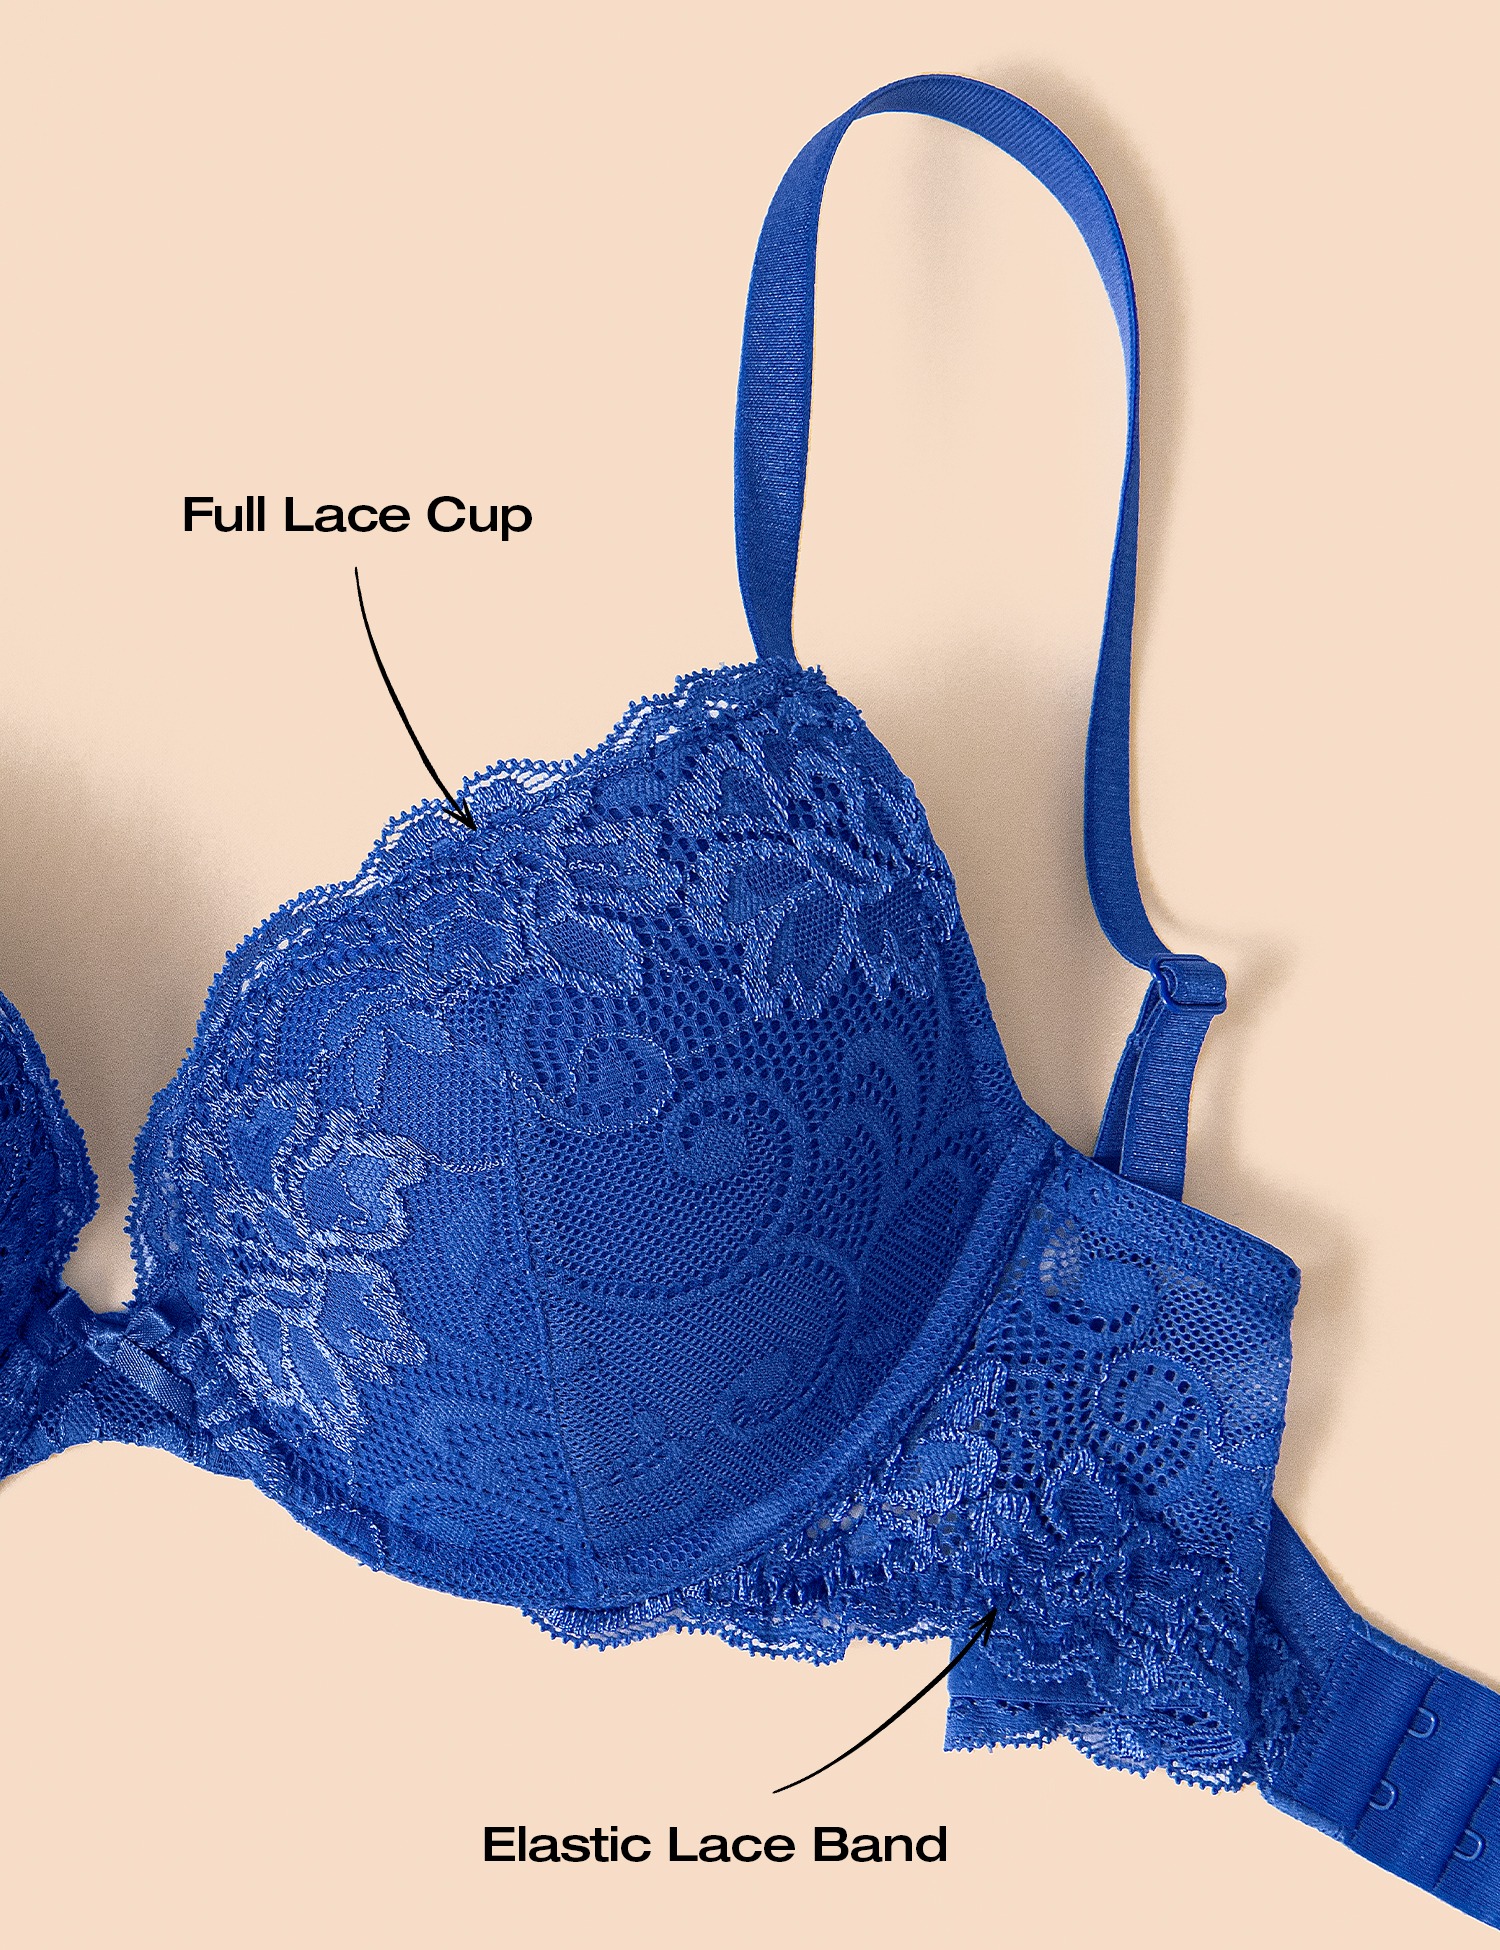 Deyllo Women's Push Up Bra Padded Plunge Add Cups Underwire Sexy Lace Lift Up Bra, royal blue 34B - image 4 of 8